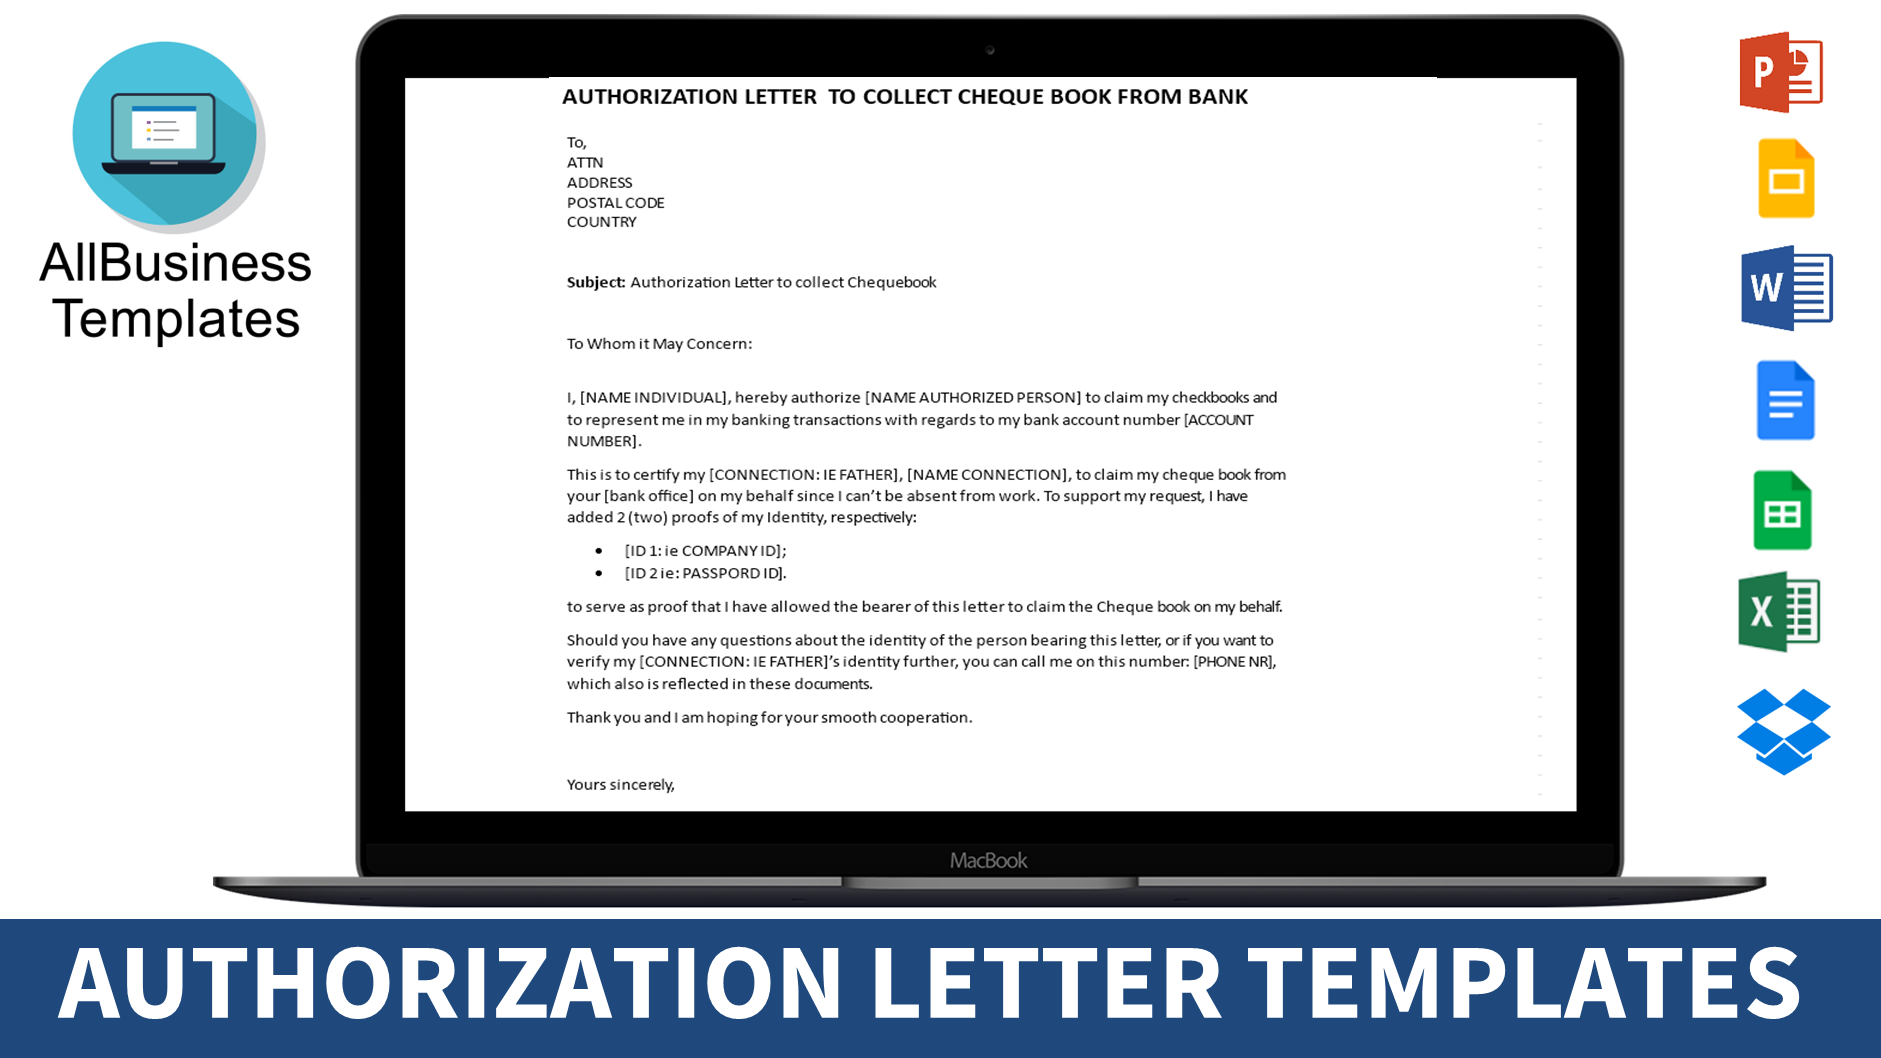 authorization letter to bank to collect cheque book modèles